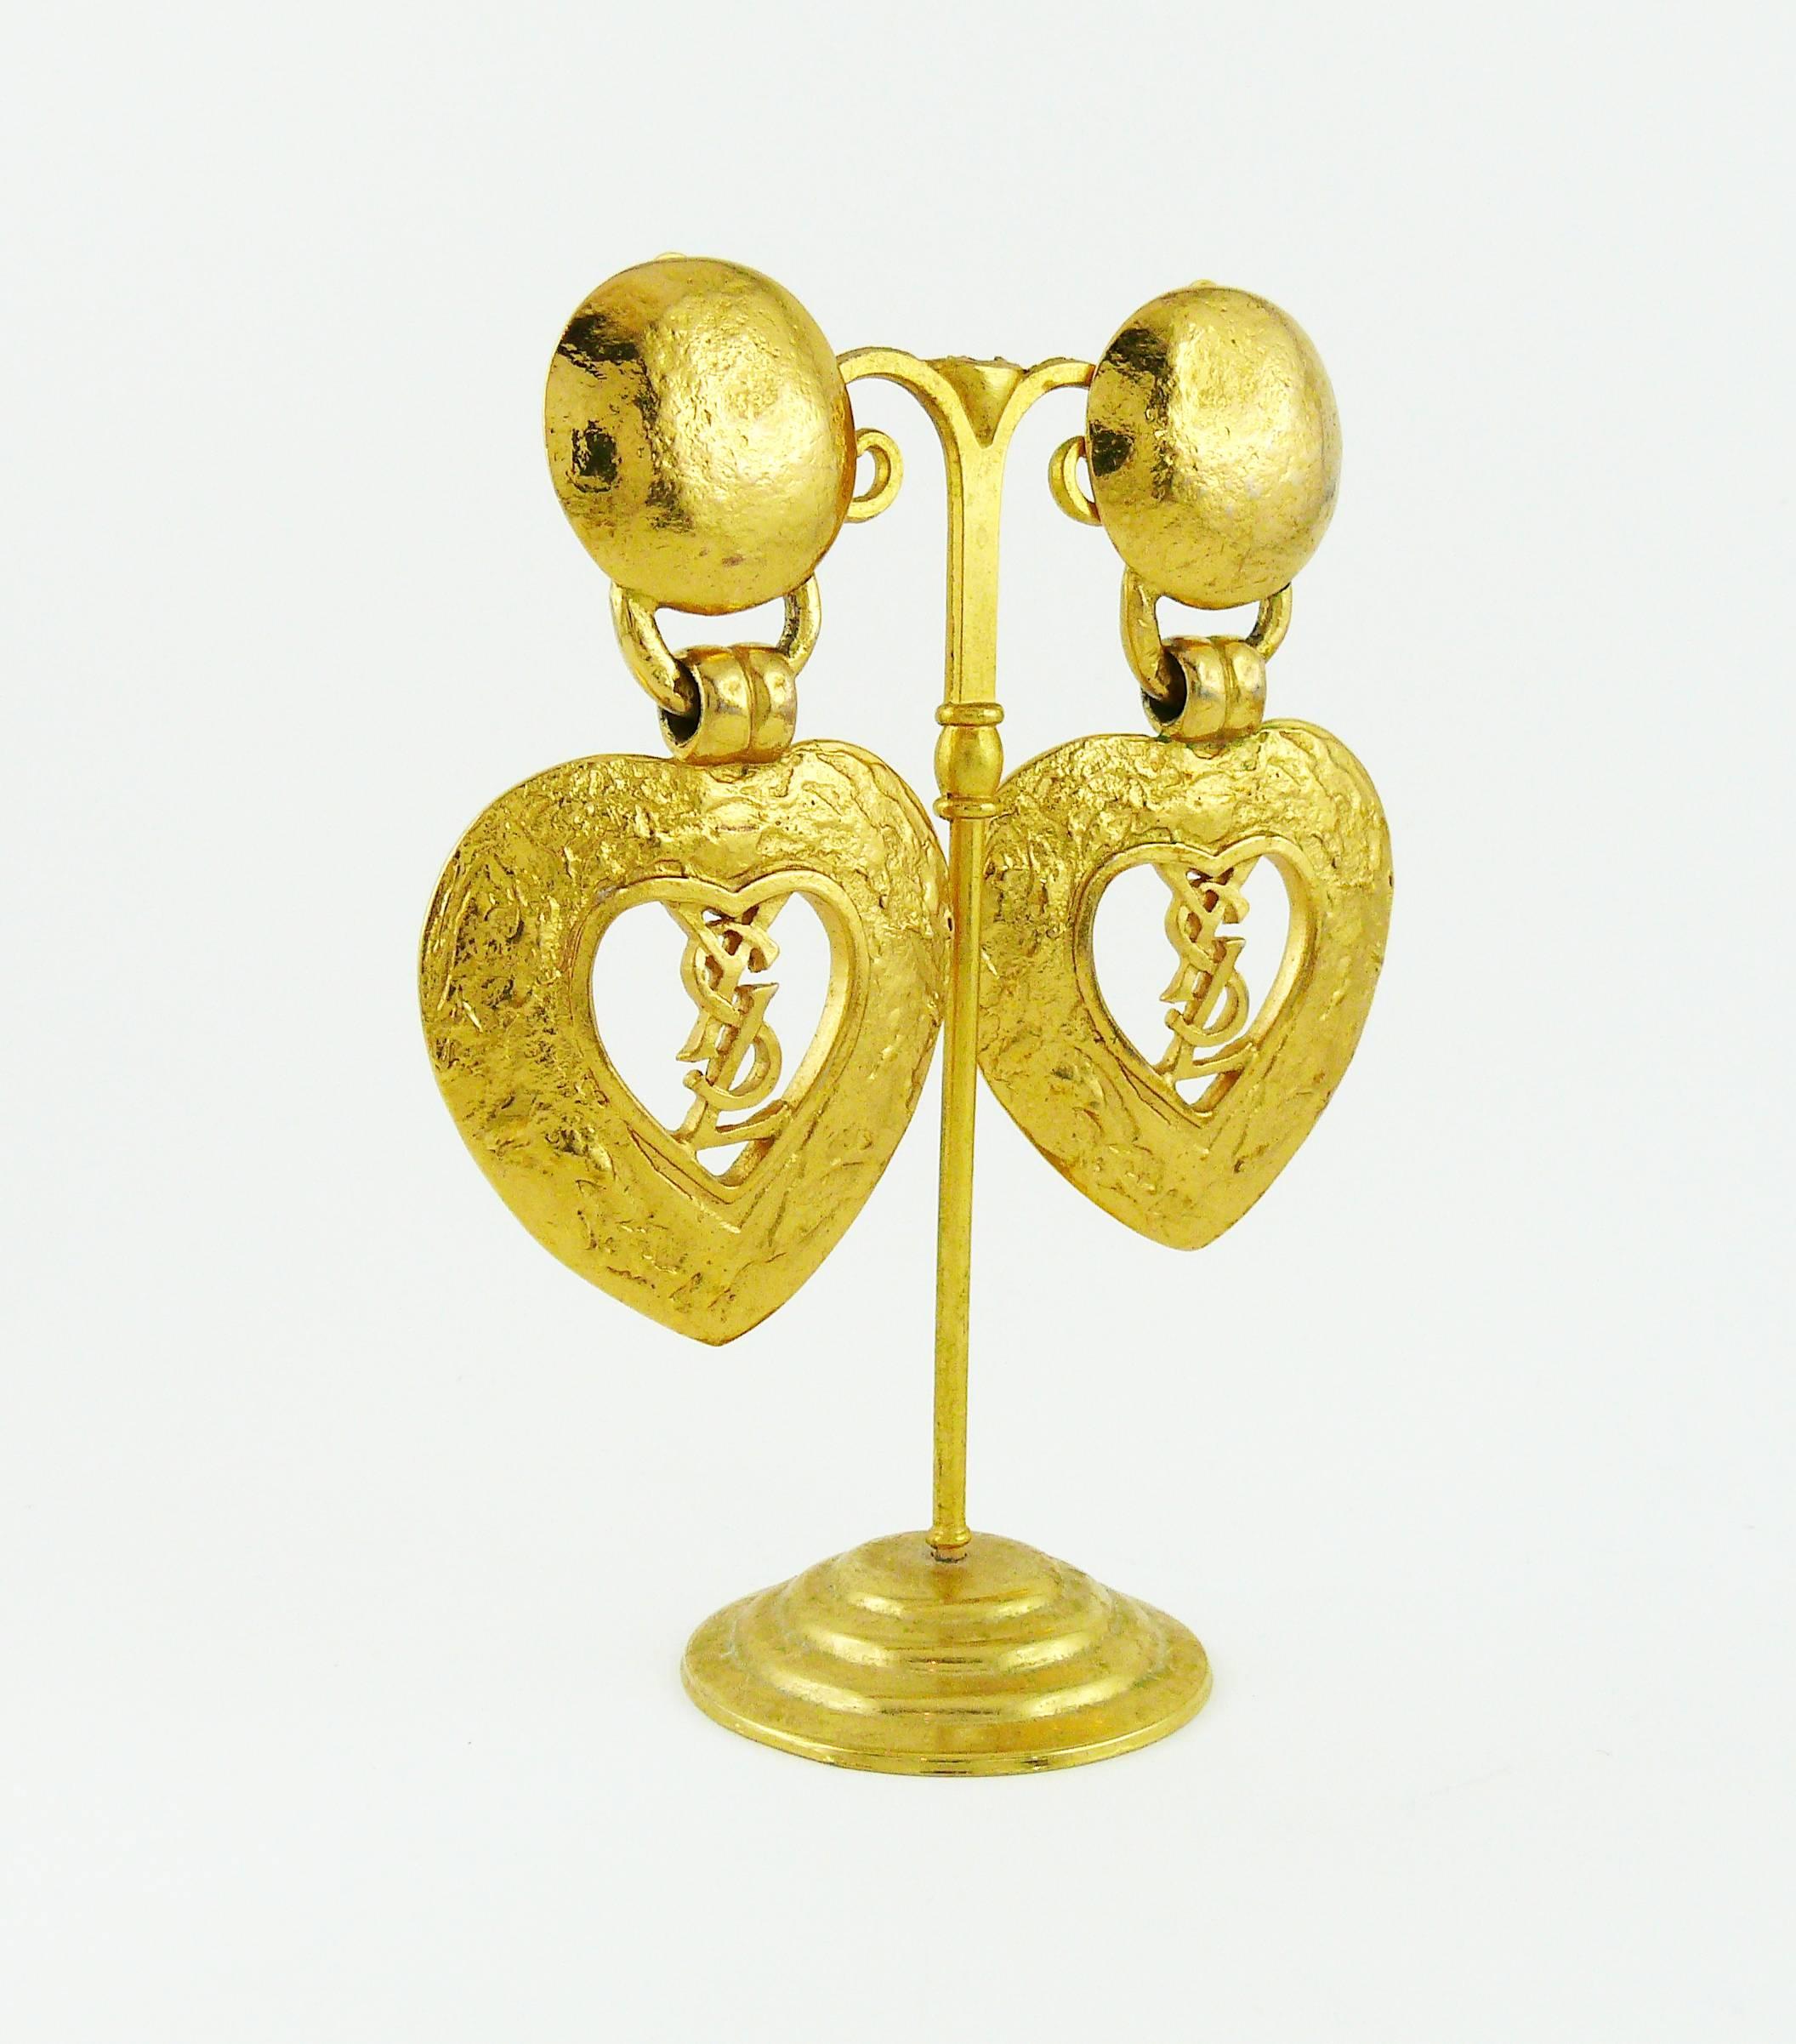 YVES SAINT LAURENT vintage dangling earrings (clip-on) featuring a textured heart with cut out YSL logo at the center.

Marked YSL Made in France.

Indicative measurements : length approx. 7 cm (2.76 inches)/ max. width approx. 4 cm (1.57